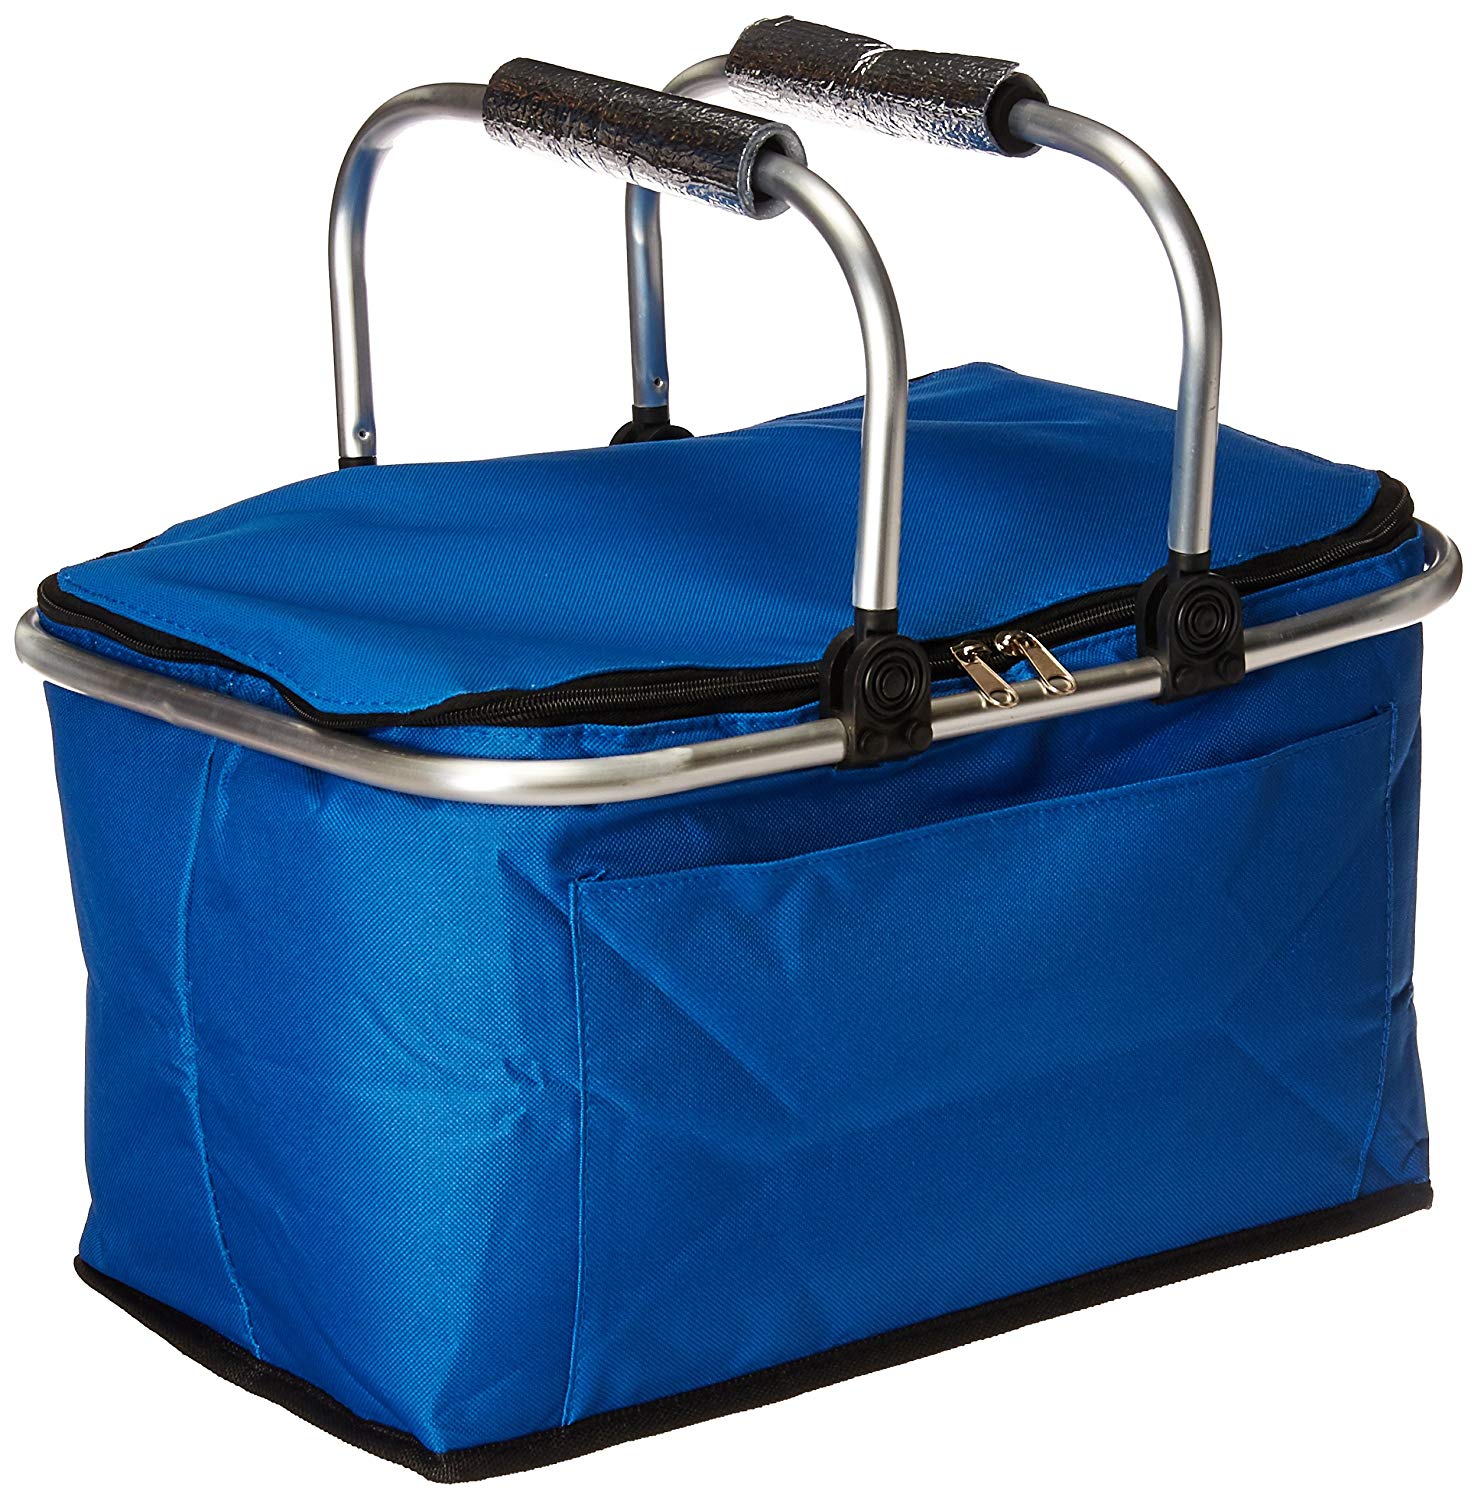 AIOIAI Insulated Folding Picnic Basket -Insulated Cooler with Carrying Handles 